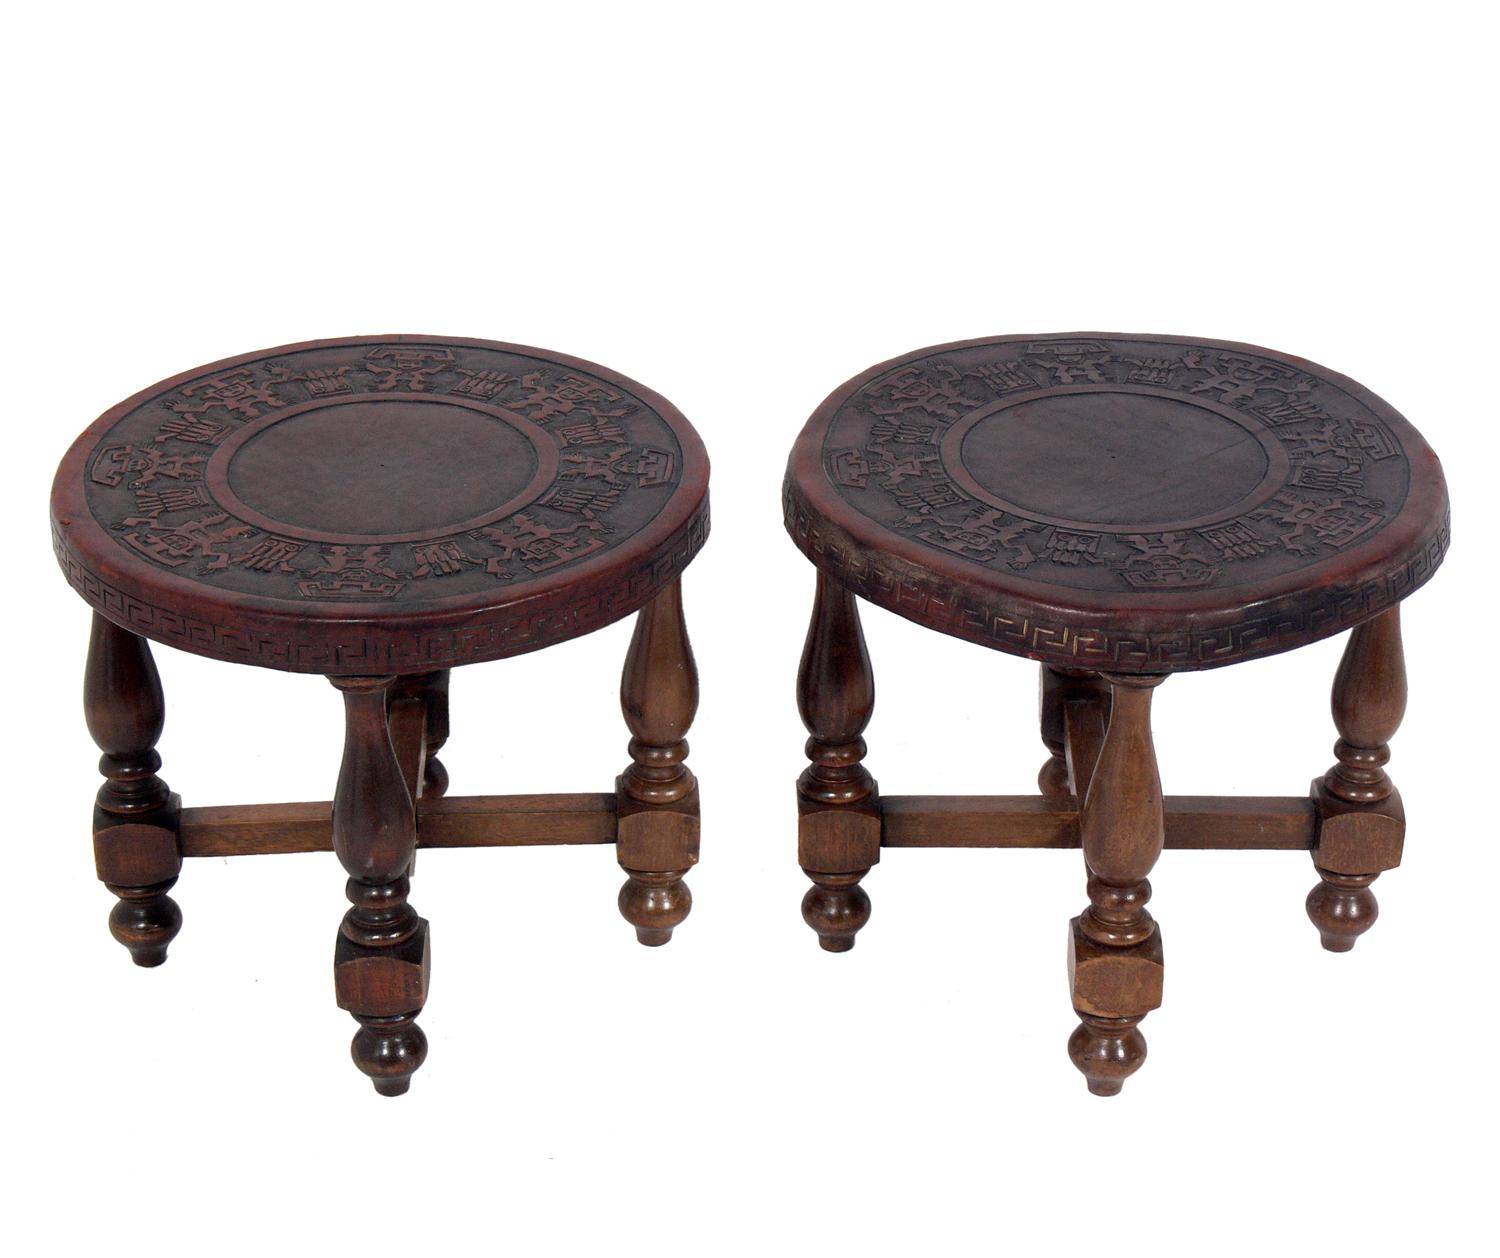 Pair of Mexican embossed leather end tables or stools, Mexican, circa 1940s. They retain their warm original patina. They would be perfect in a California or Mexican hacienda or anywhere you want the organic tribal vibe of aged leather and wood.